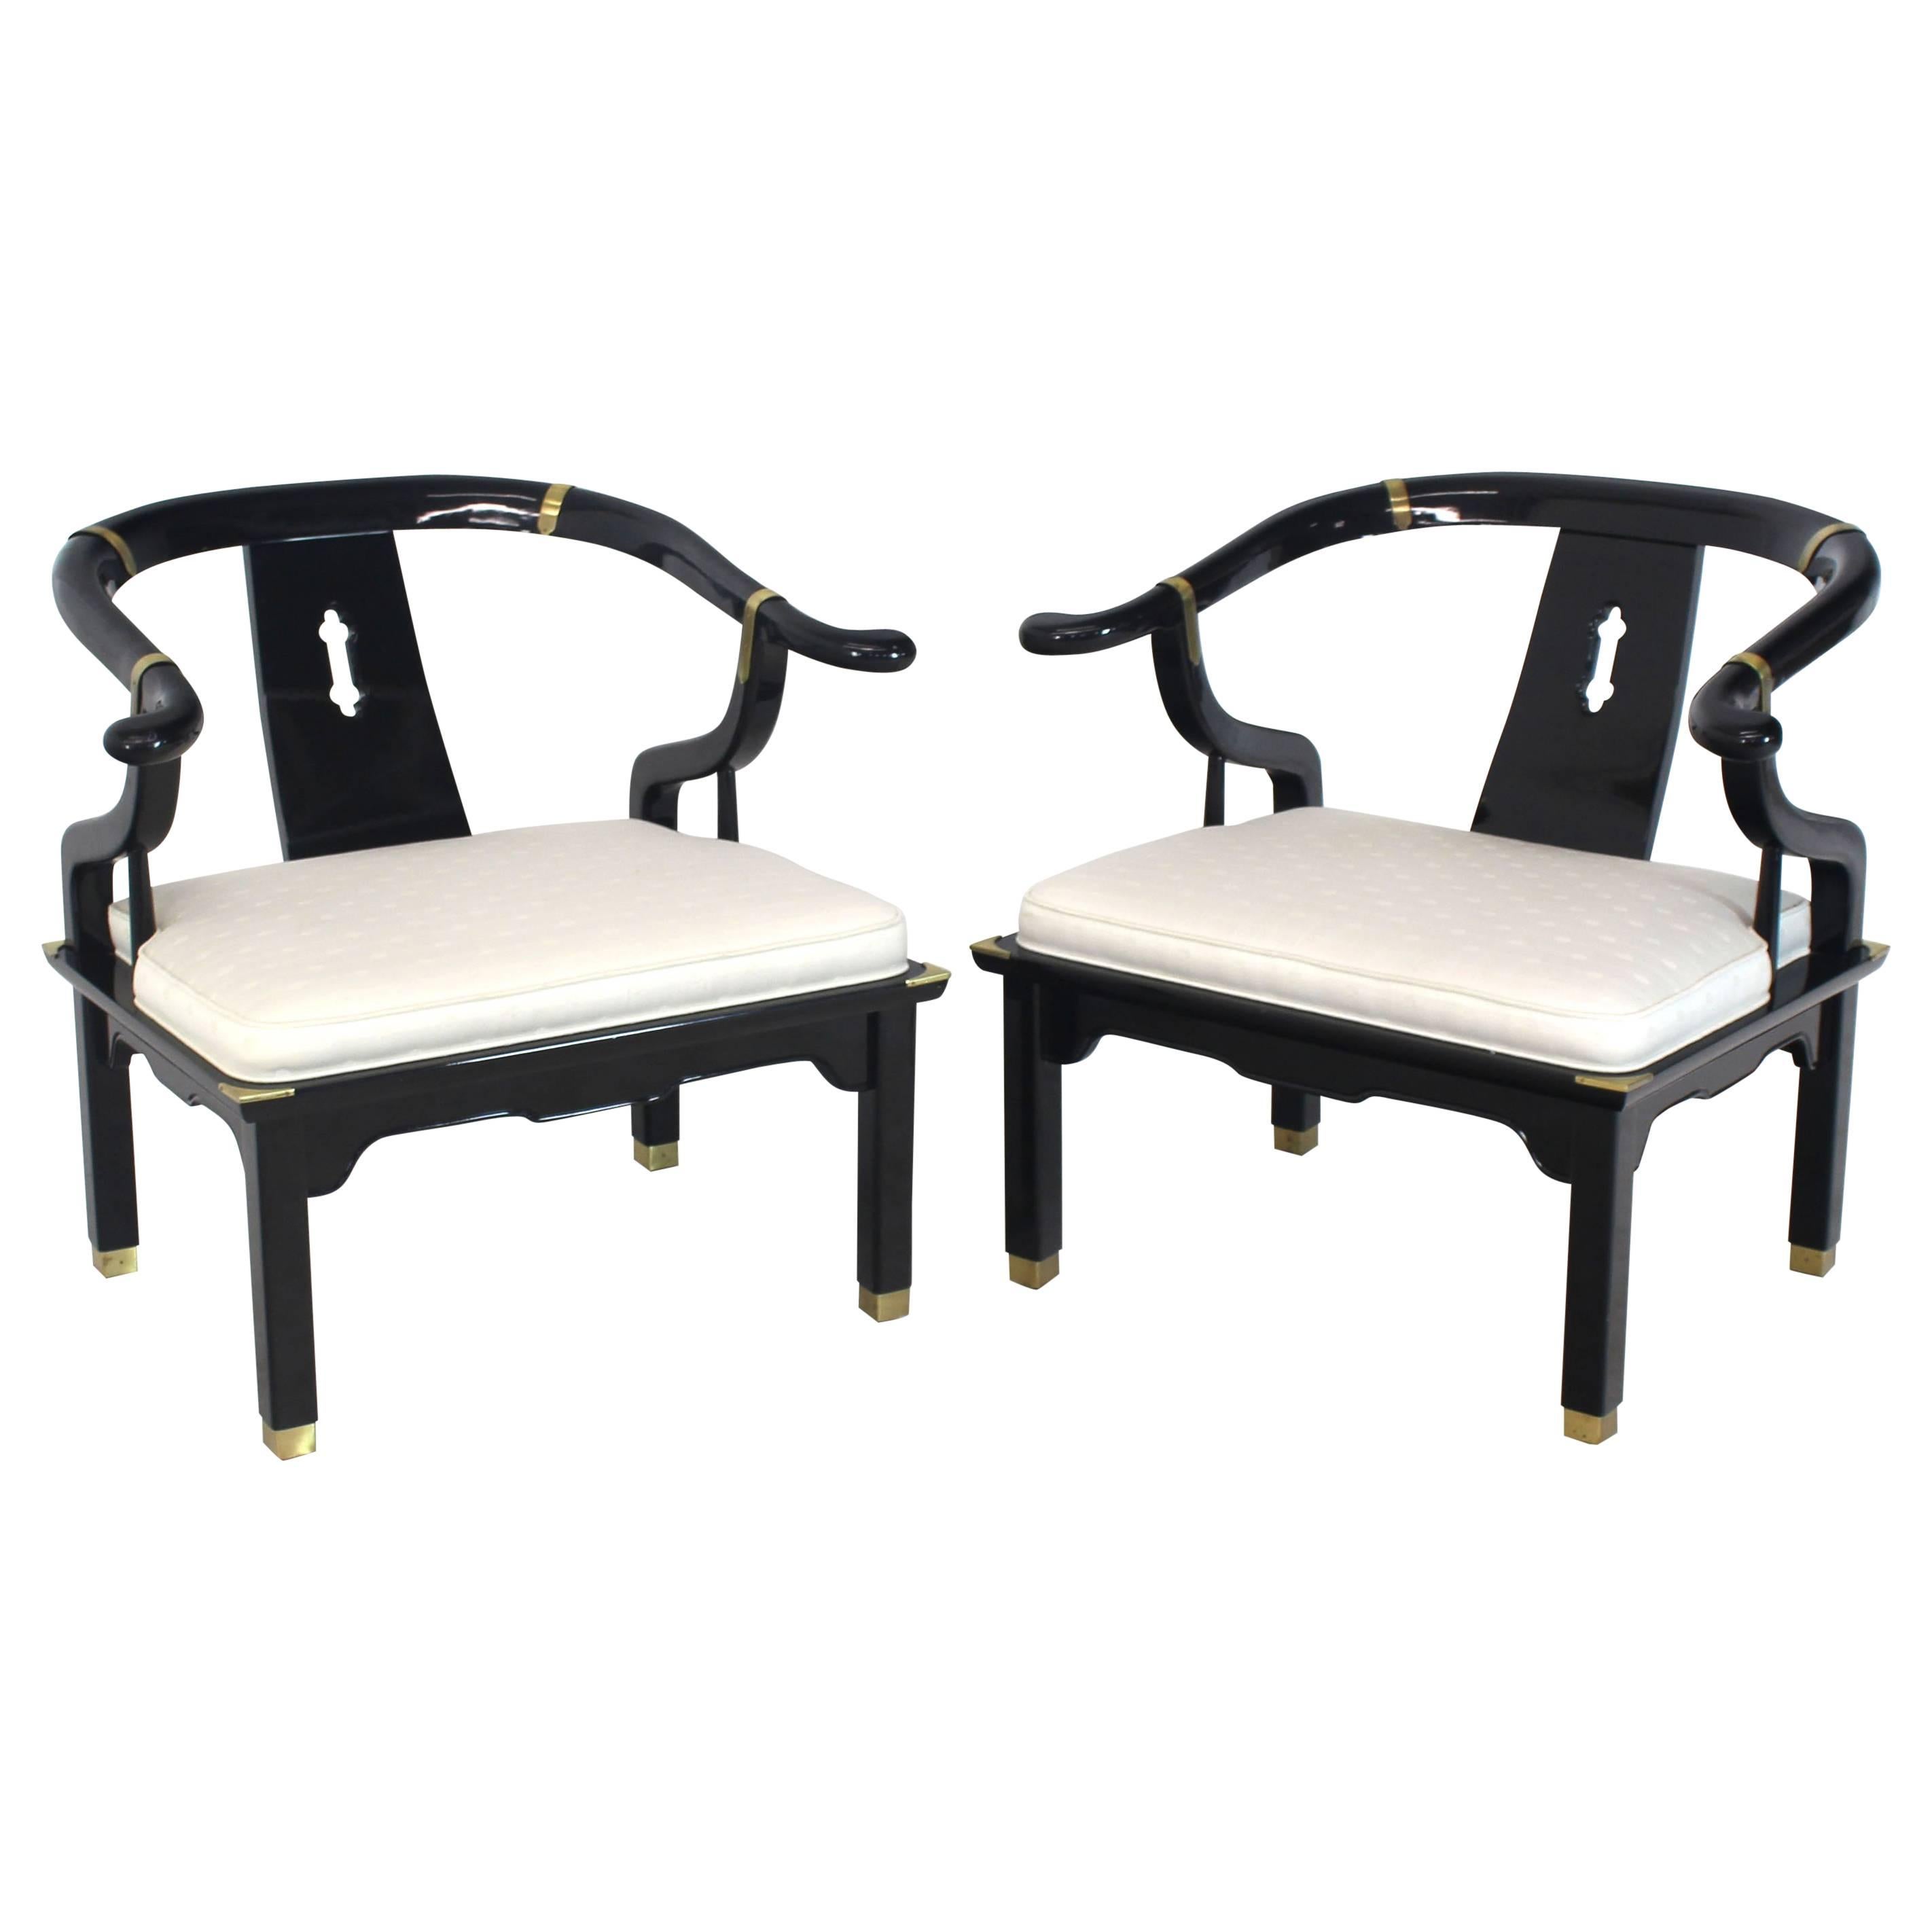 Pair of Black Lacquer Brass Hardware Horse Shoe Barrel Back Lounge Chairs